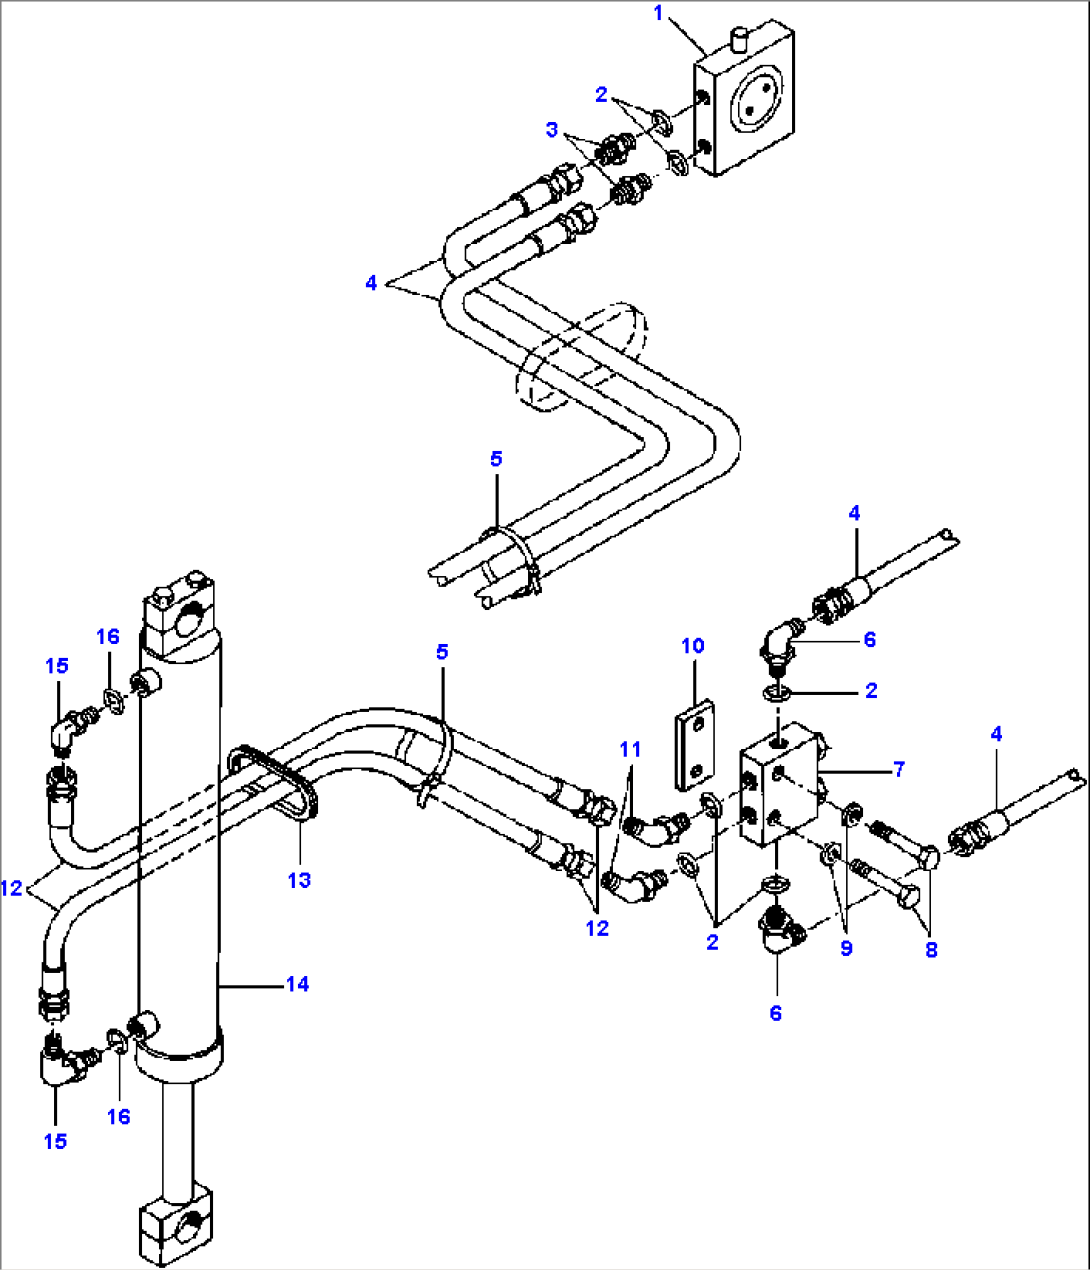 RIPPER CYLINDER ACTUATOR LINES